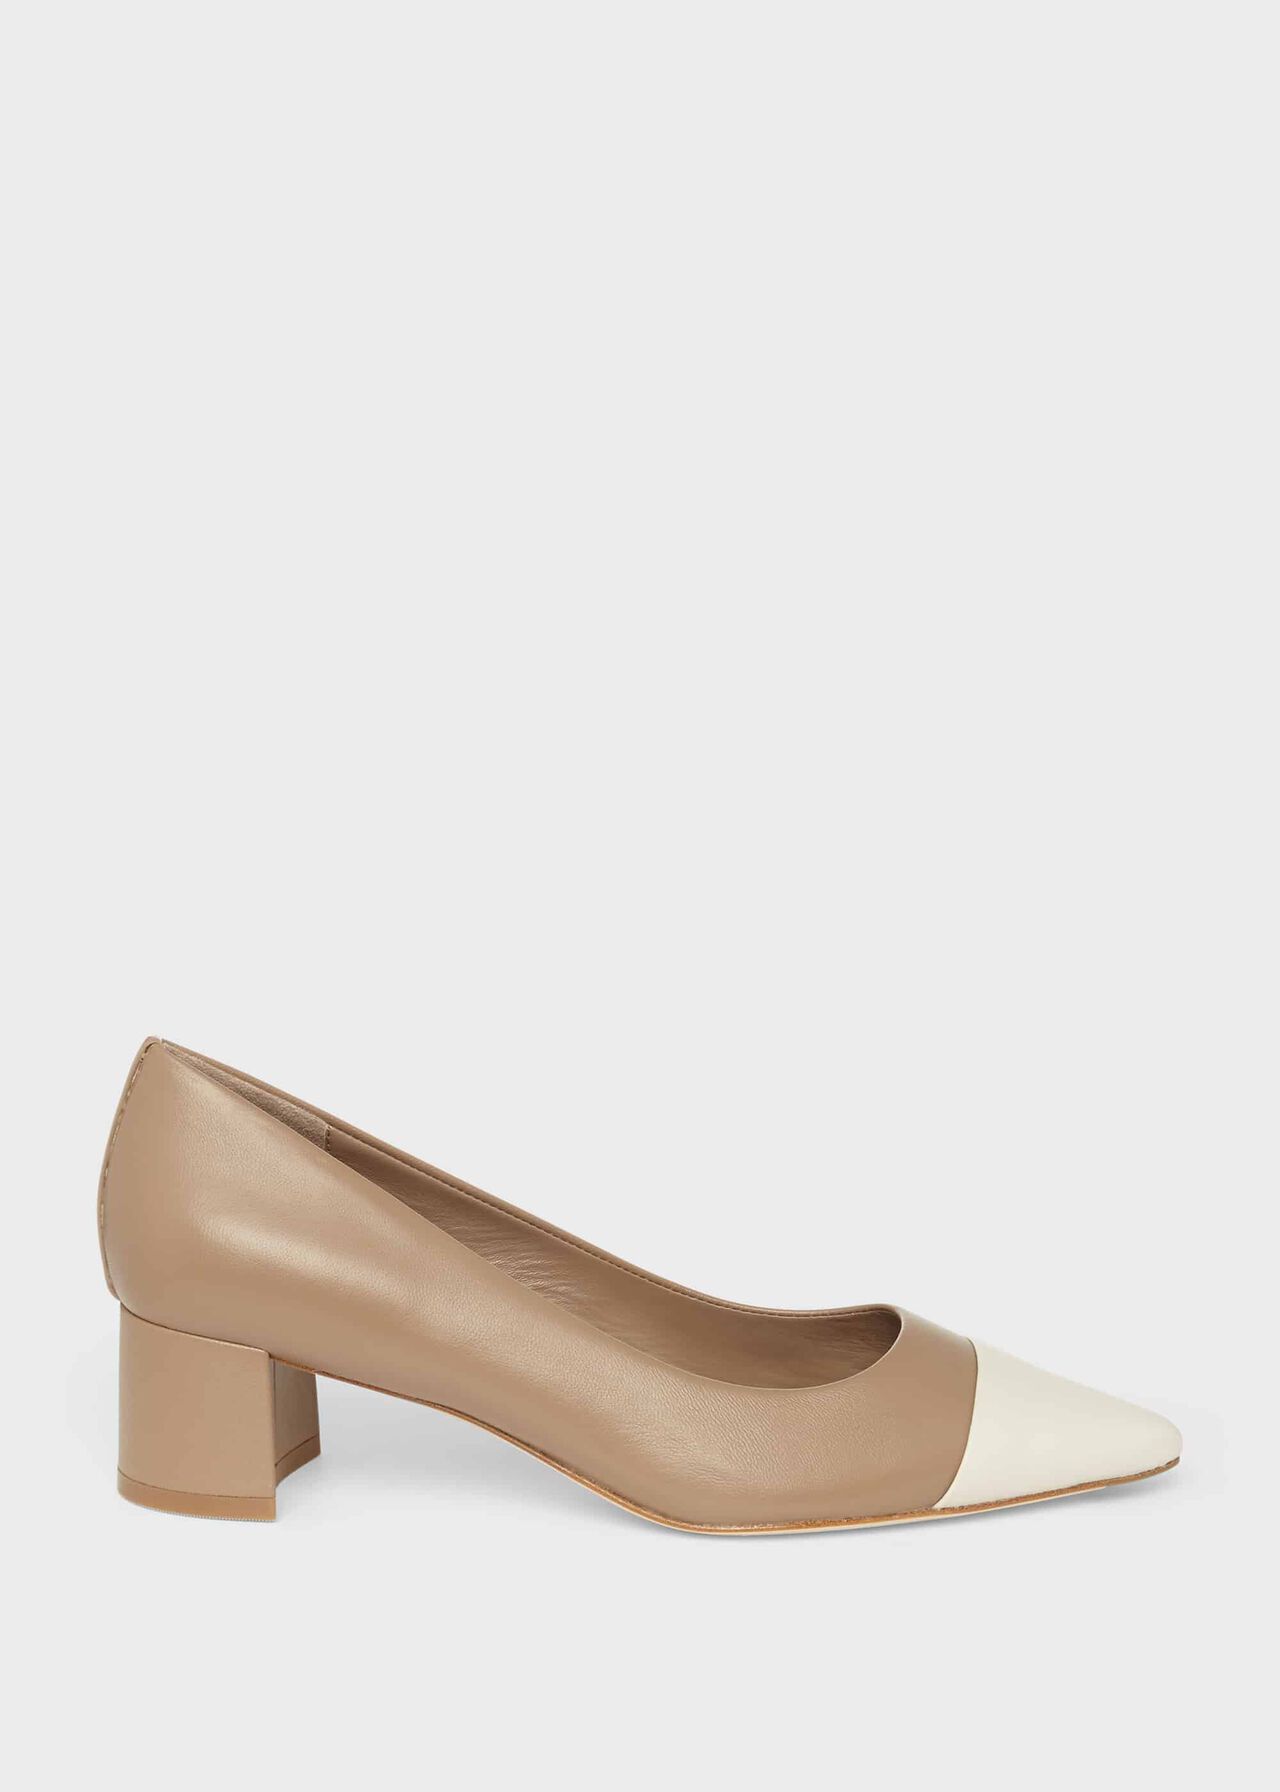 Natalie Leather Court Shoes, Fawn, hi-res